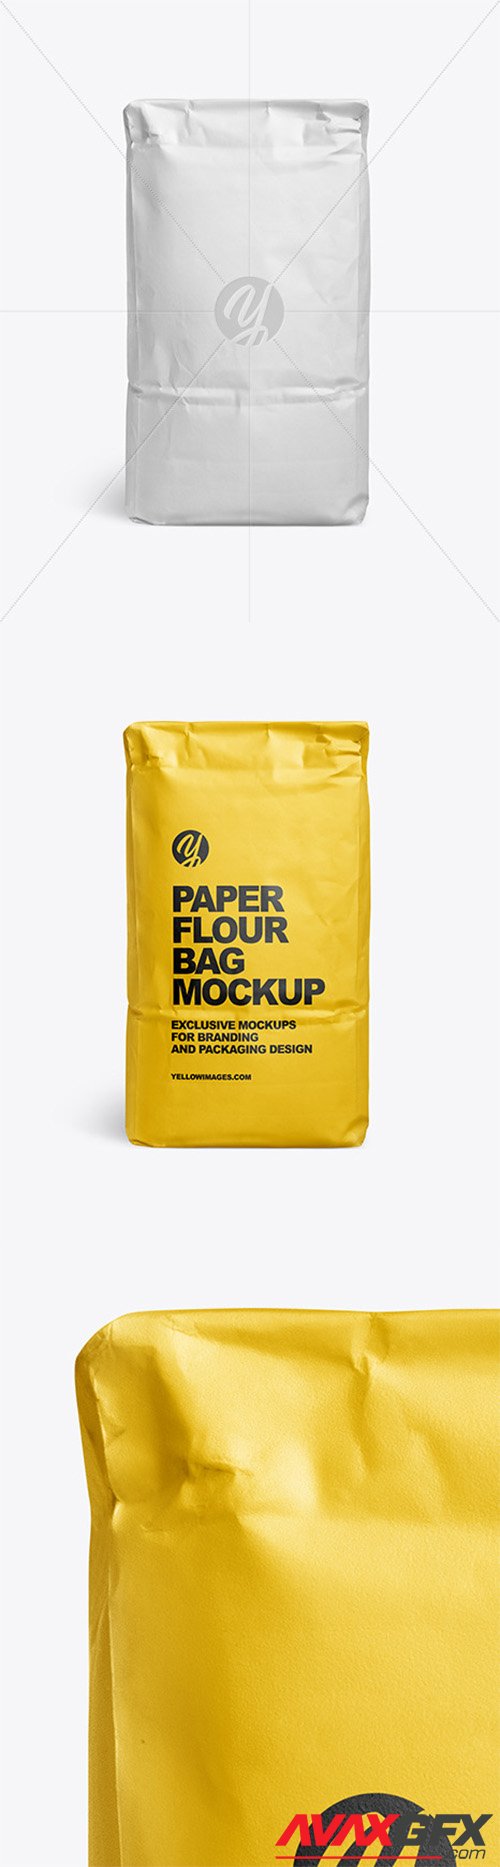 Download Paper Flour Bag Mockup Front View 61238 Avaxgfx All Downloads That You Need In One Place Graphic From Nitroflare Rapidgator